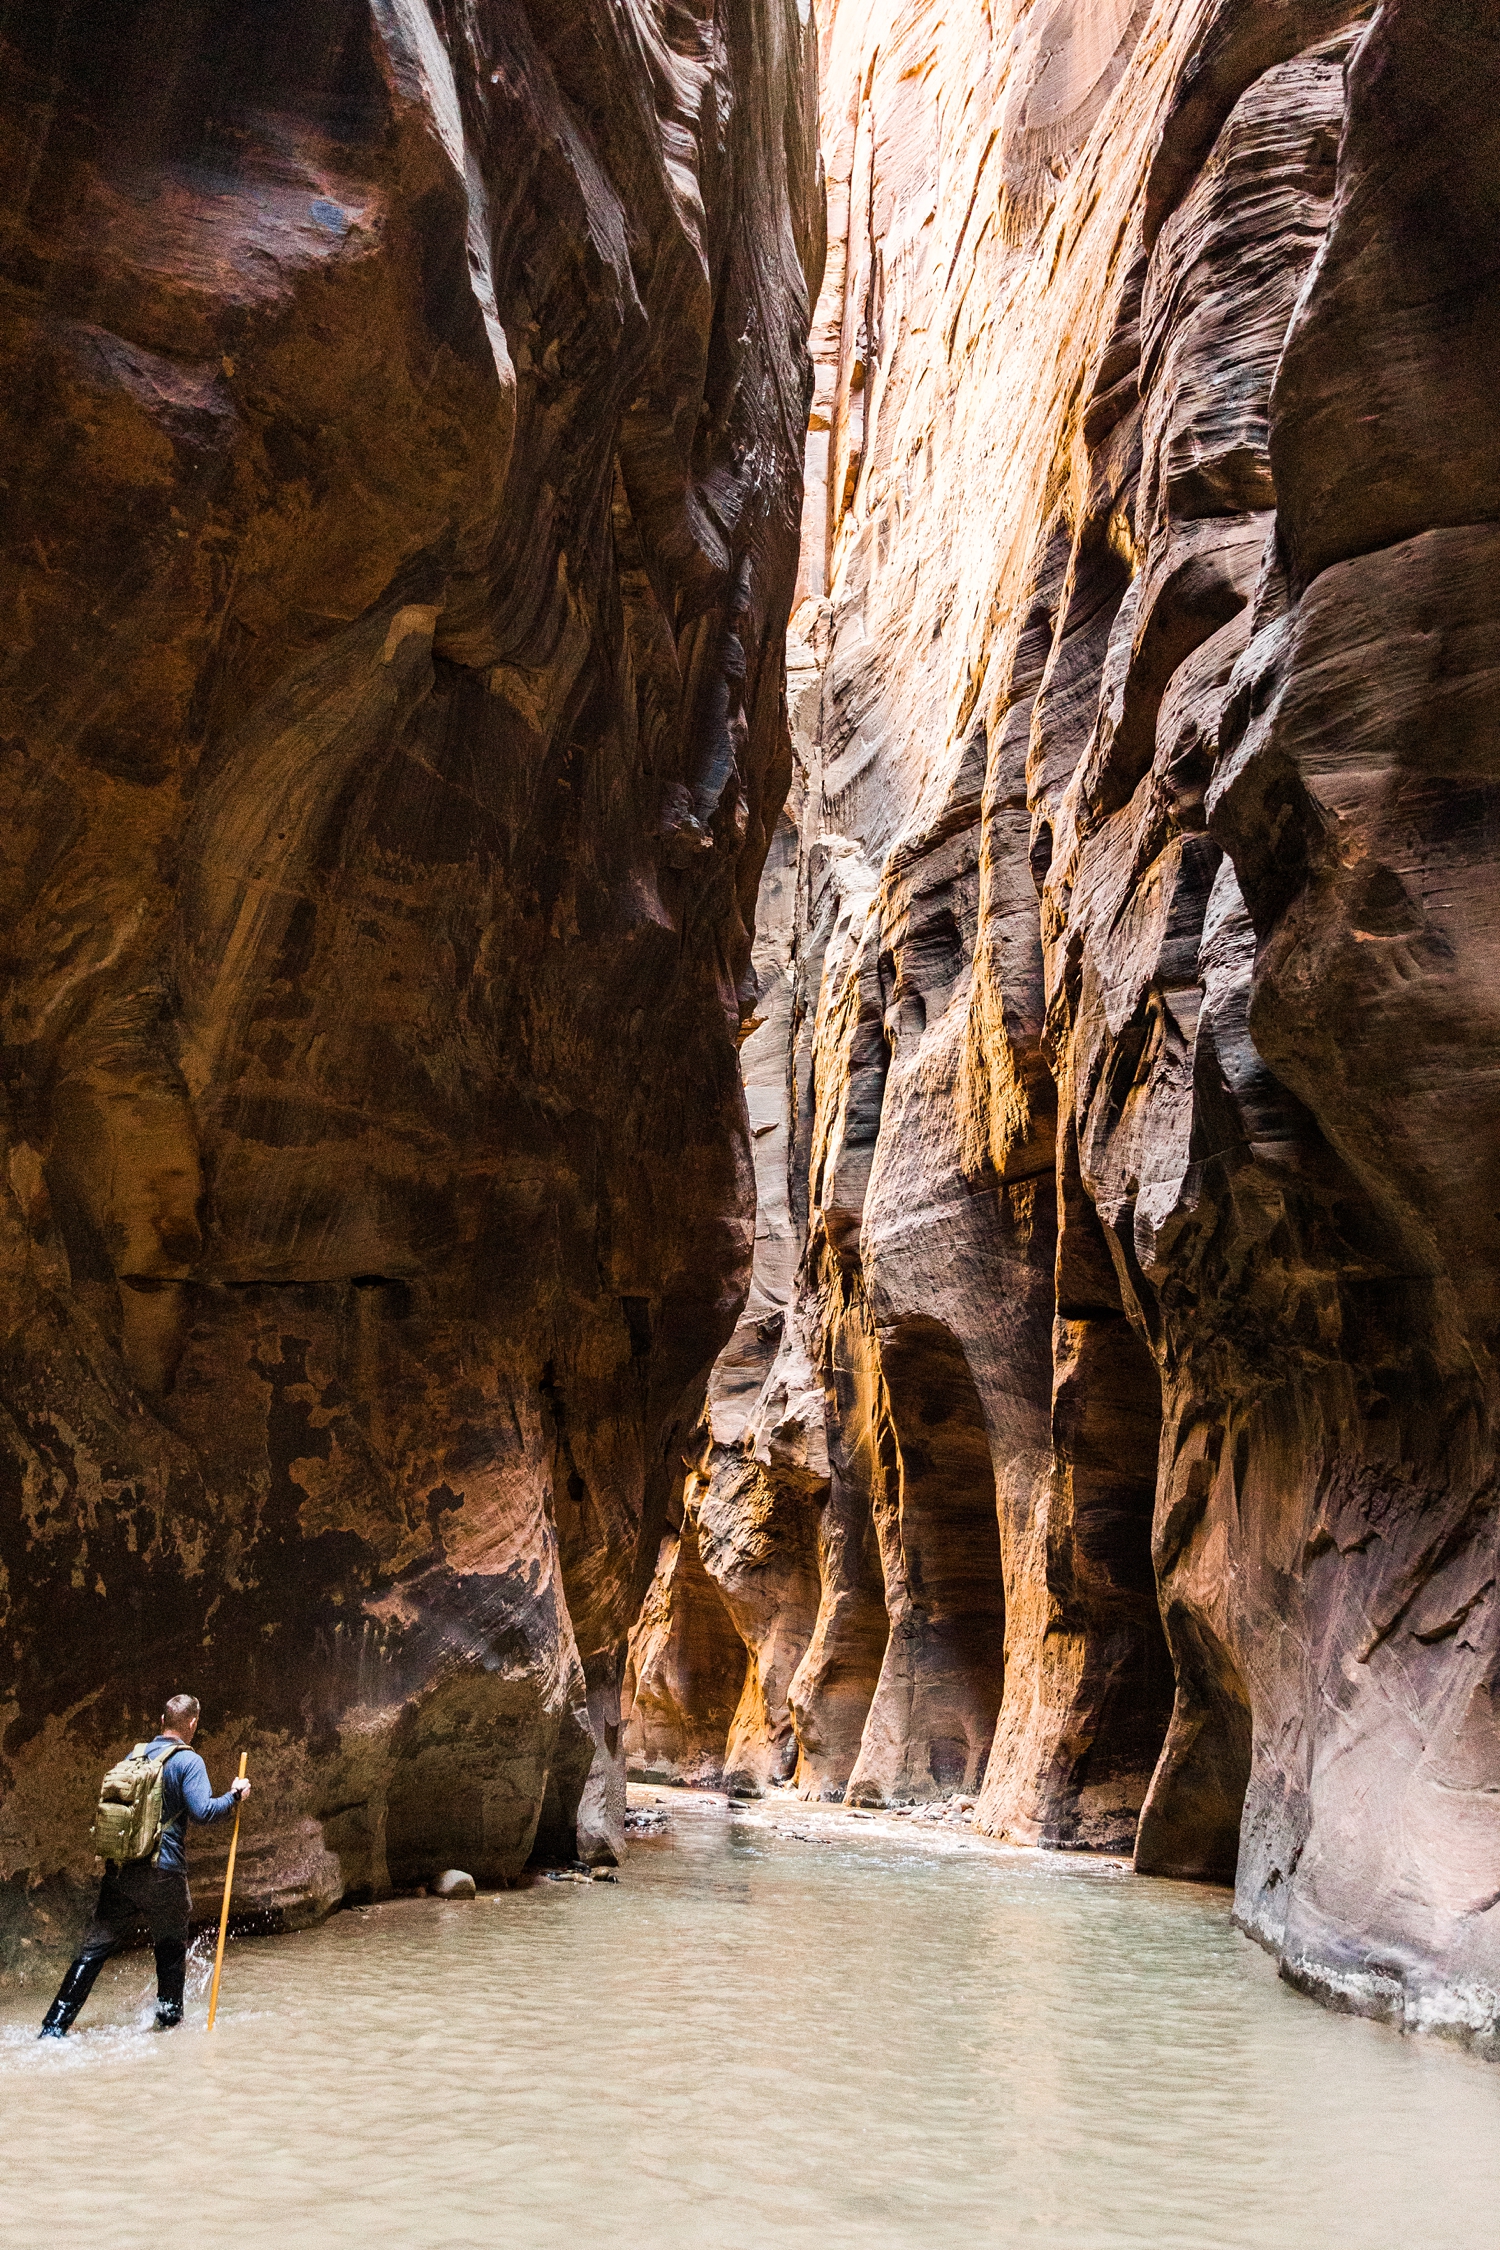 As Joes hikes through the Virgin River, sunrise light shines through the canyon in the Wall Street section of the Narrows hike at Zion National Park | CB Studio